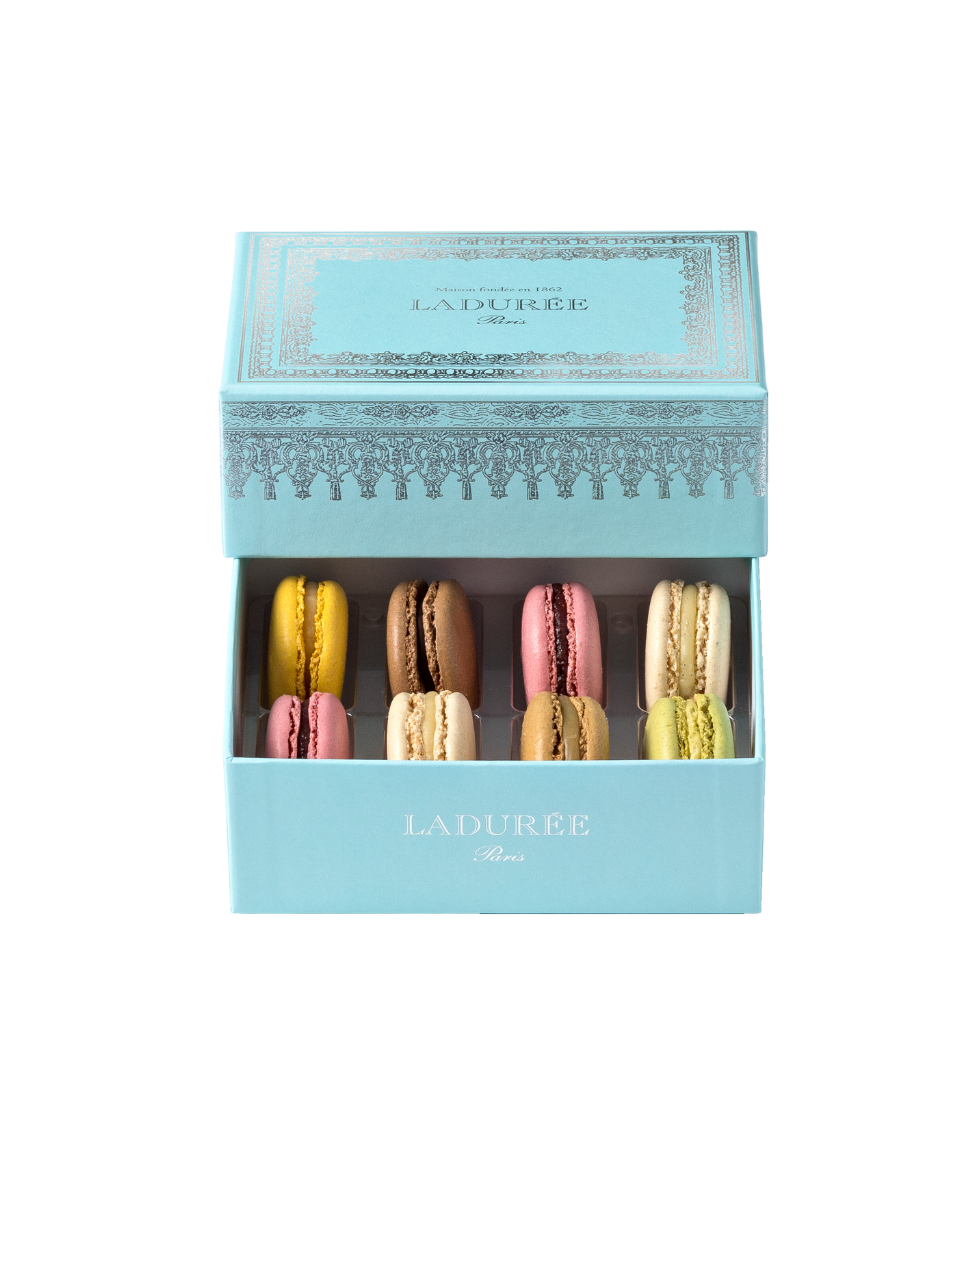 Ladurée Assorted Macarons Gift Box - 8 piece Napoleon Edition | Exquisite Wine & Alcohol Gift Delivery Toronto Canada | Vyno